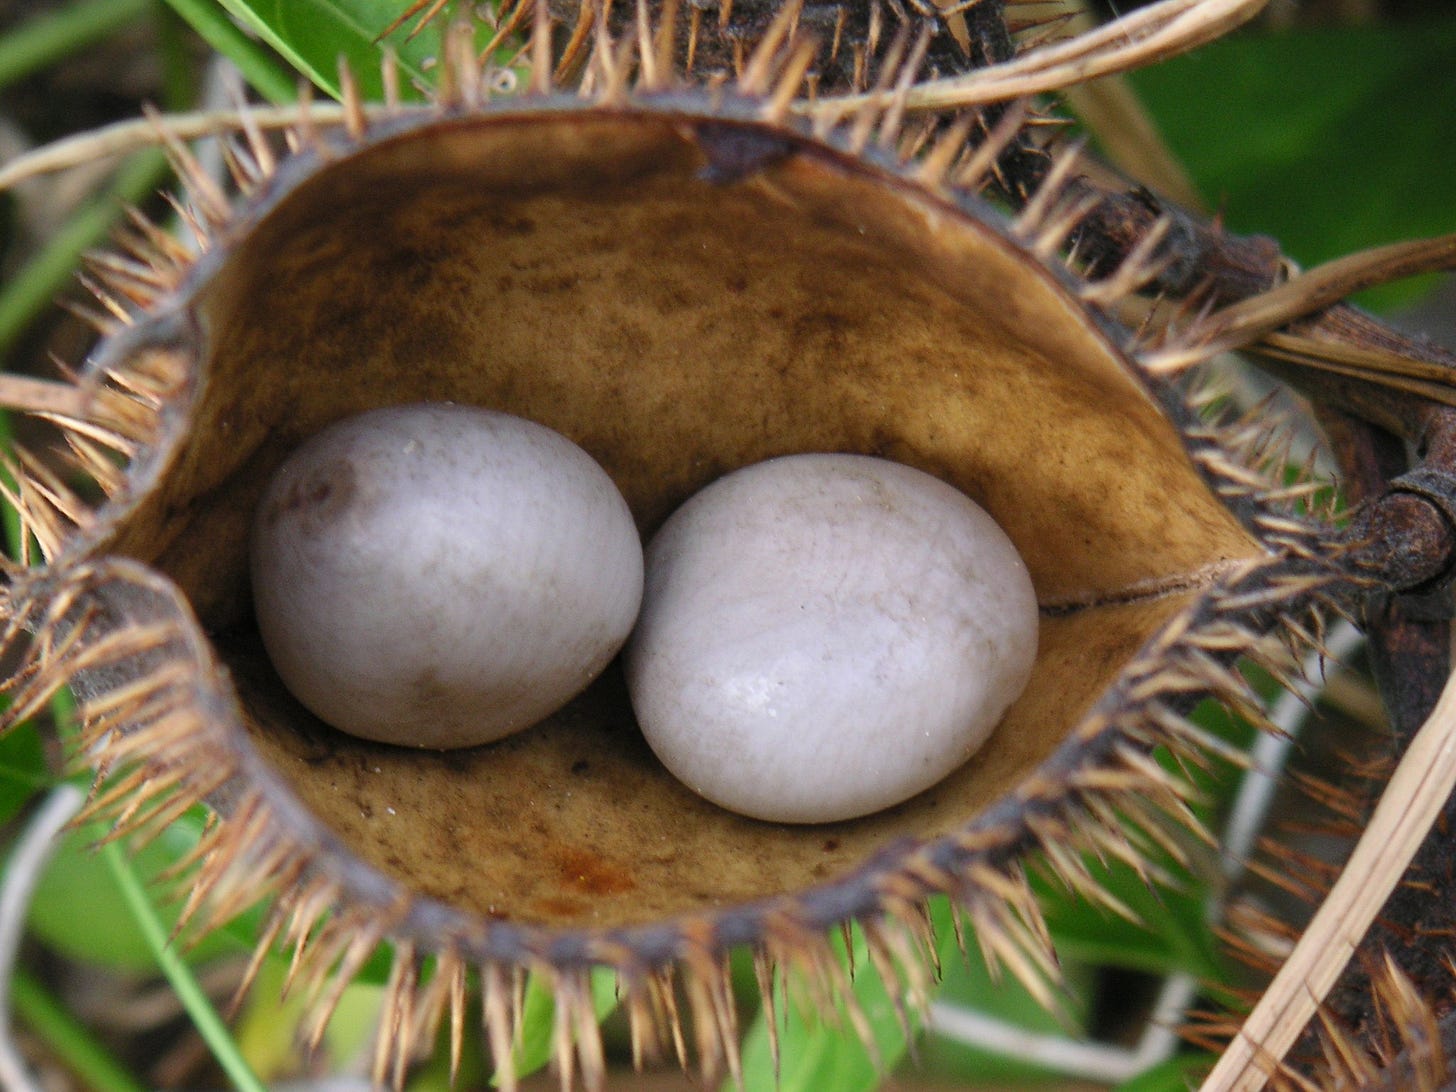 Two grayish, ovoid shaped seeds sit in a tan colored open seed pod which has hair-like spines.